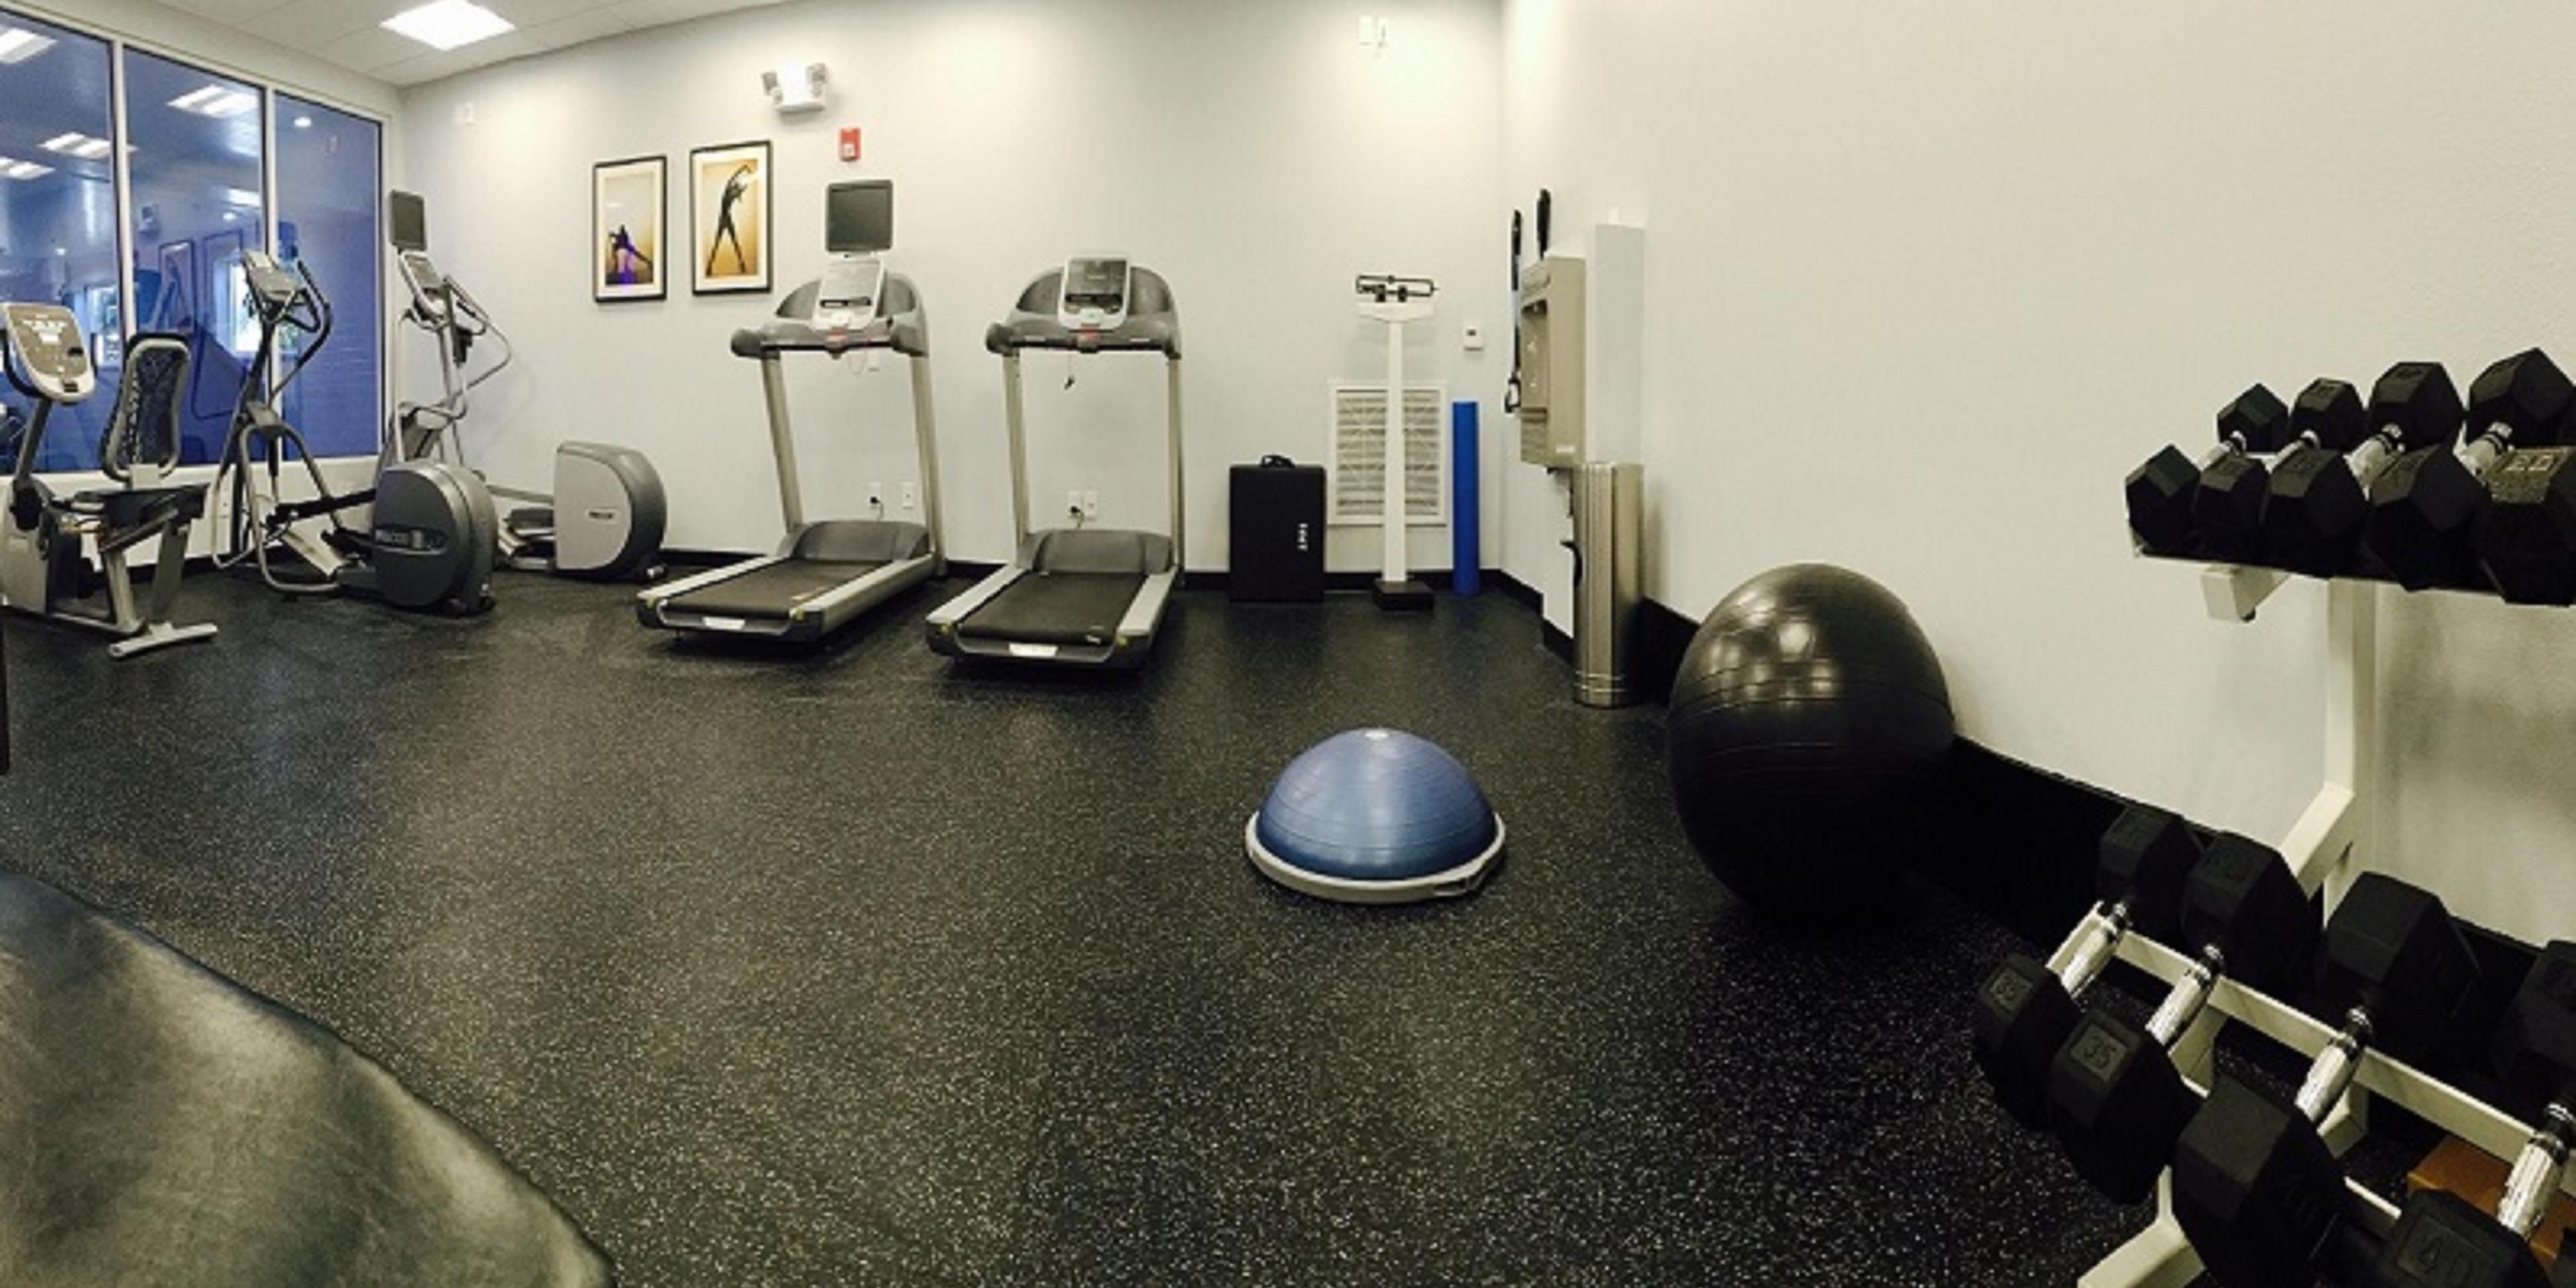 Get your sweat on in our complimentary, fully equipped fitness center with treadmill, bike, resistance band, free weights, exercise ball open 24 hours.